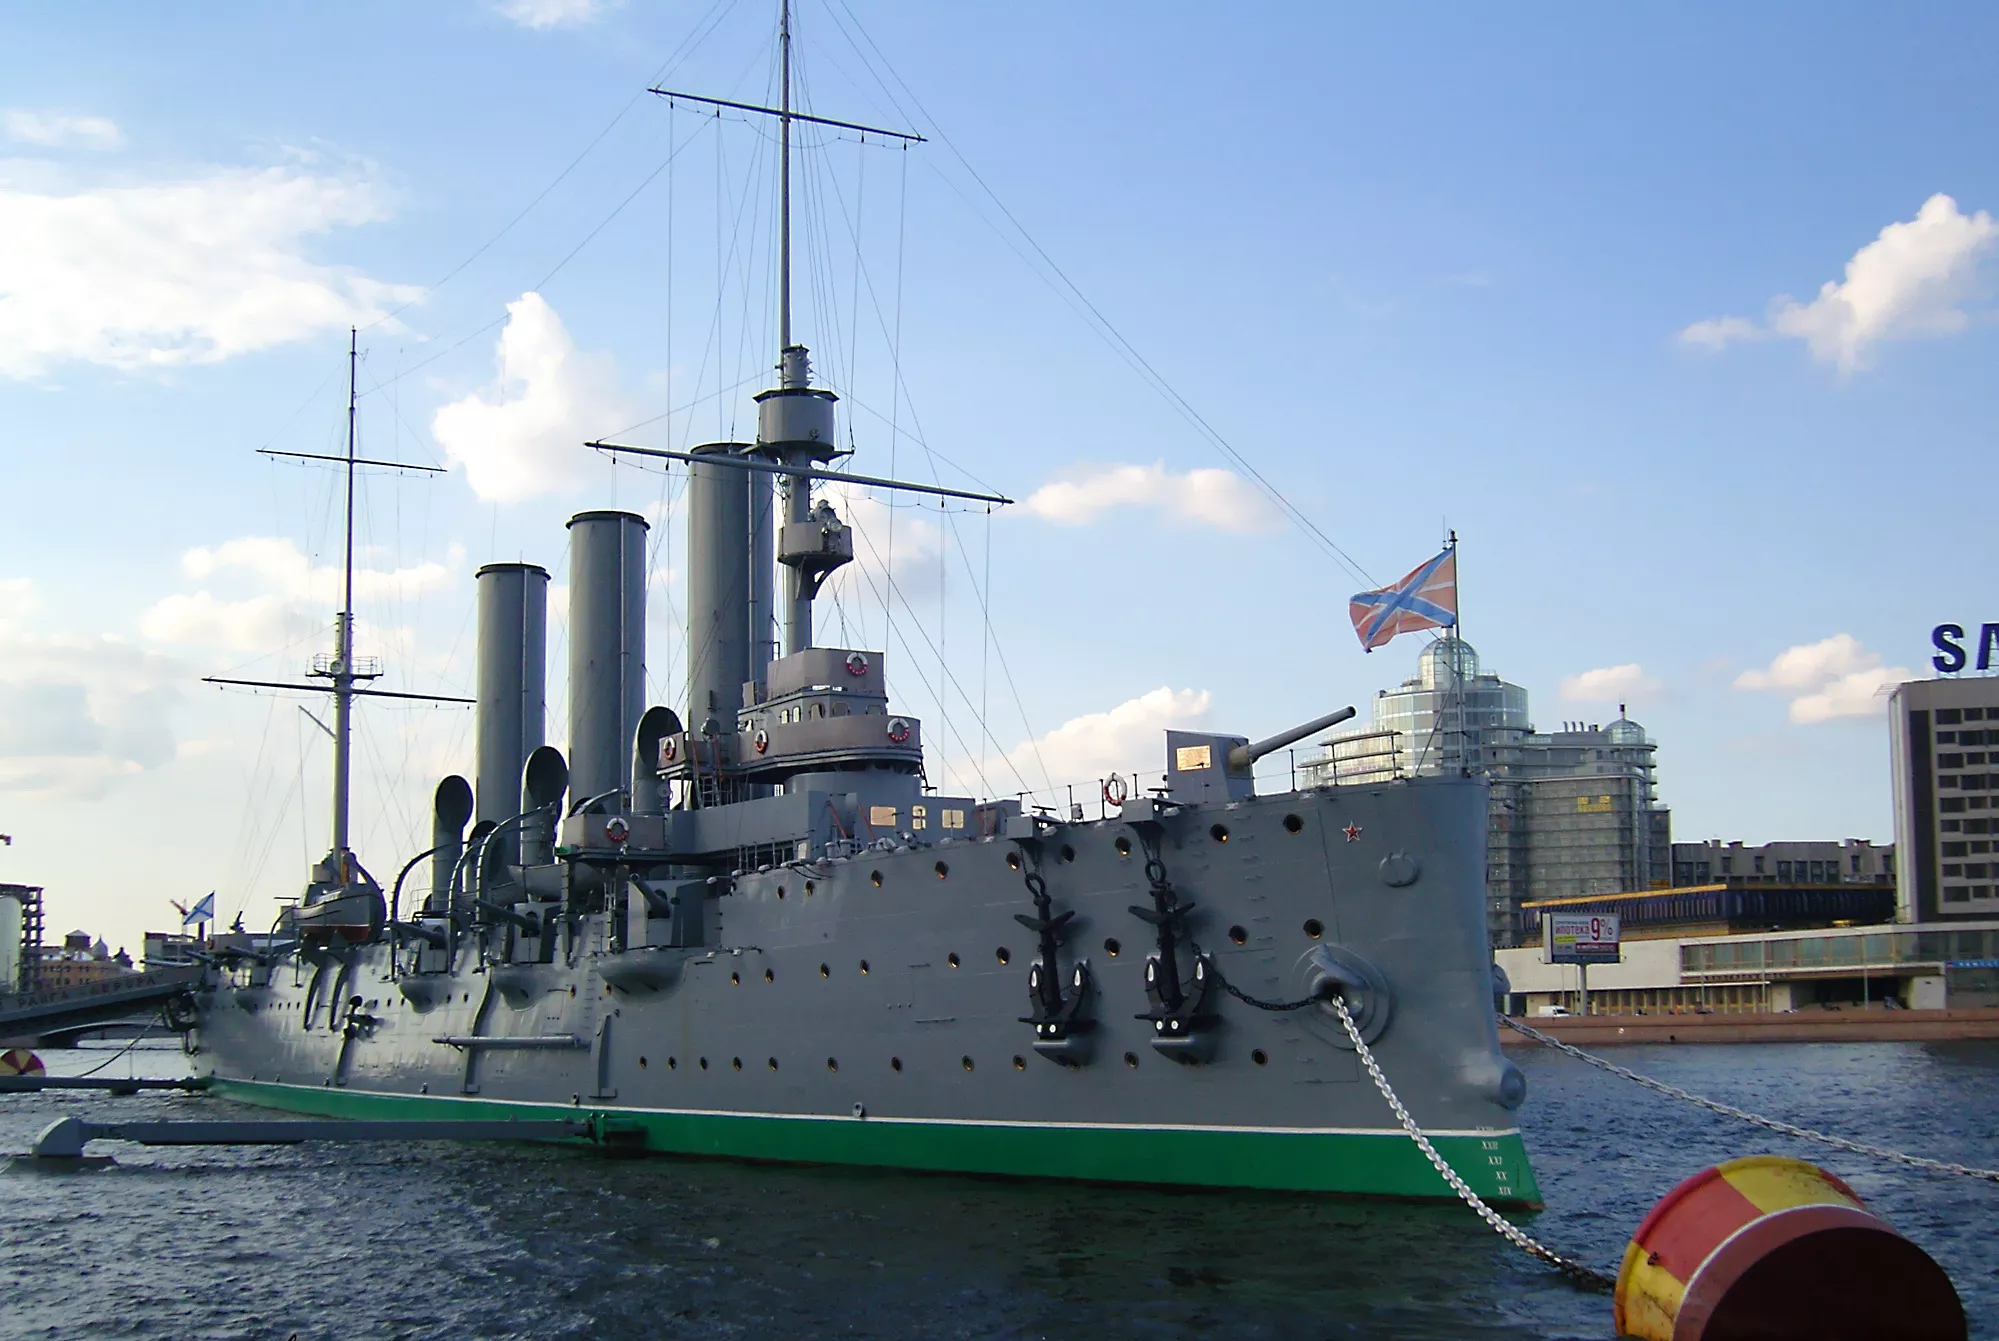 Cruiser Aurora in Russia, Europe | Museums - Rated 4.5